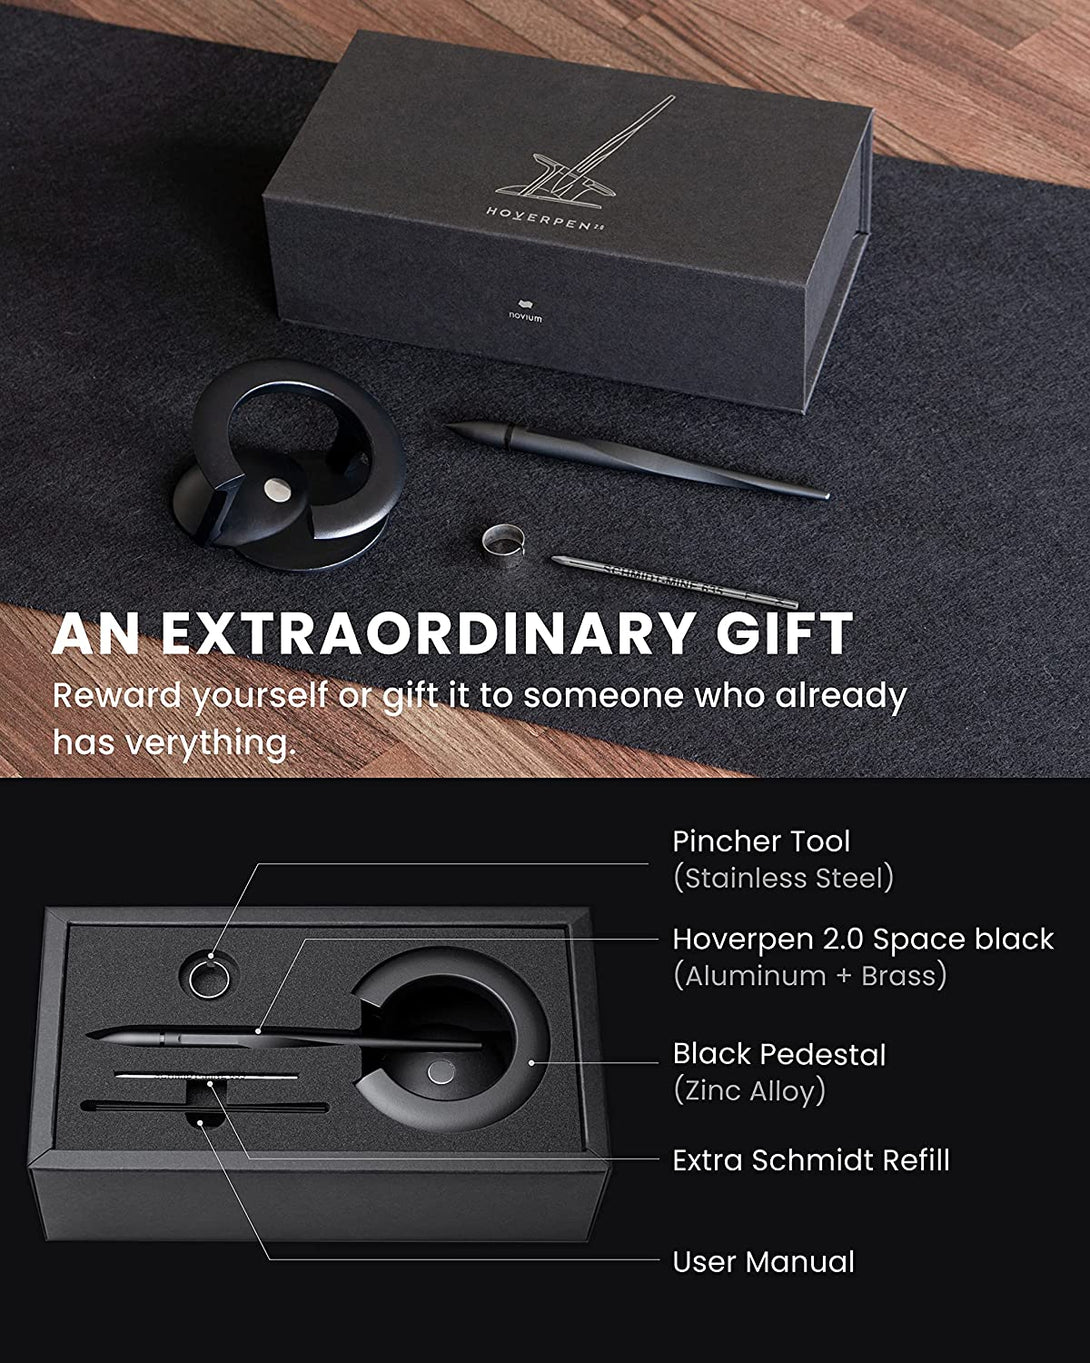 Luxury Gift Set for bosses- Hoverpen Space Black Edition